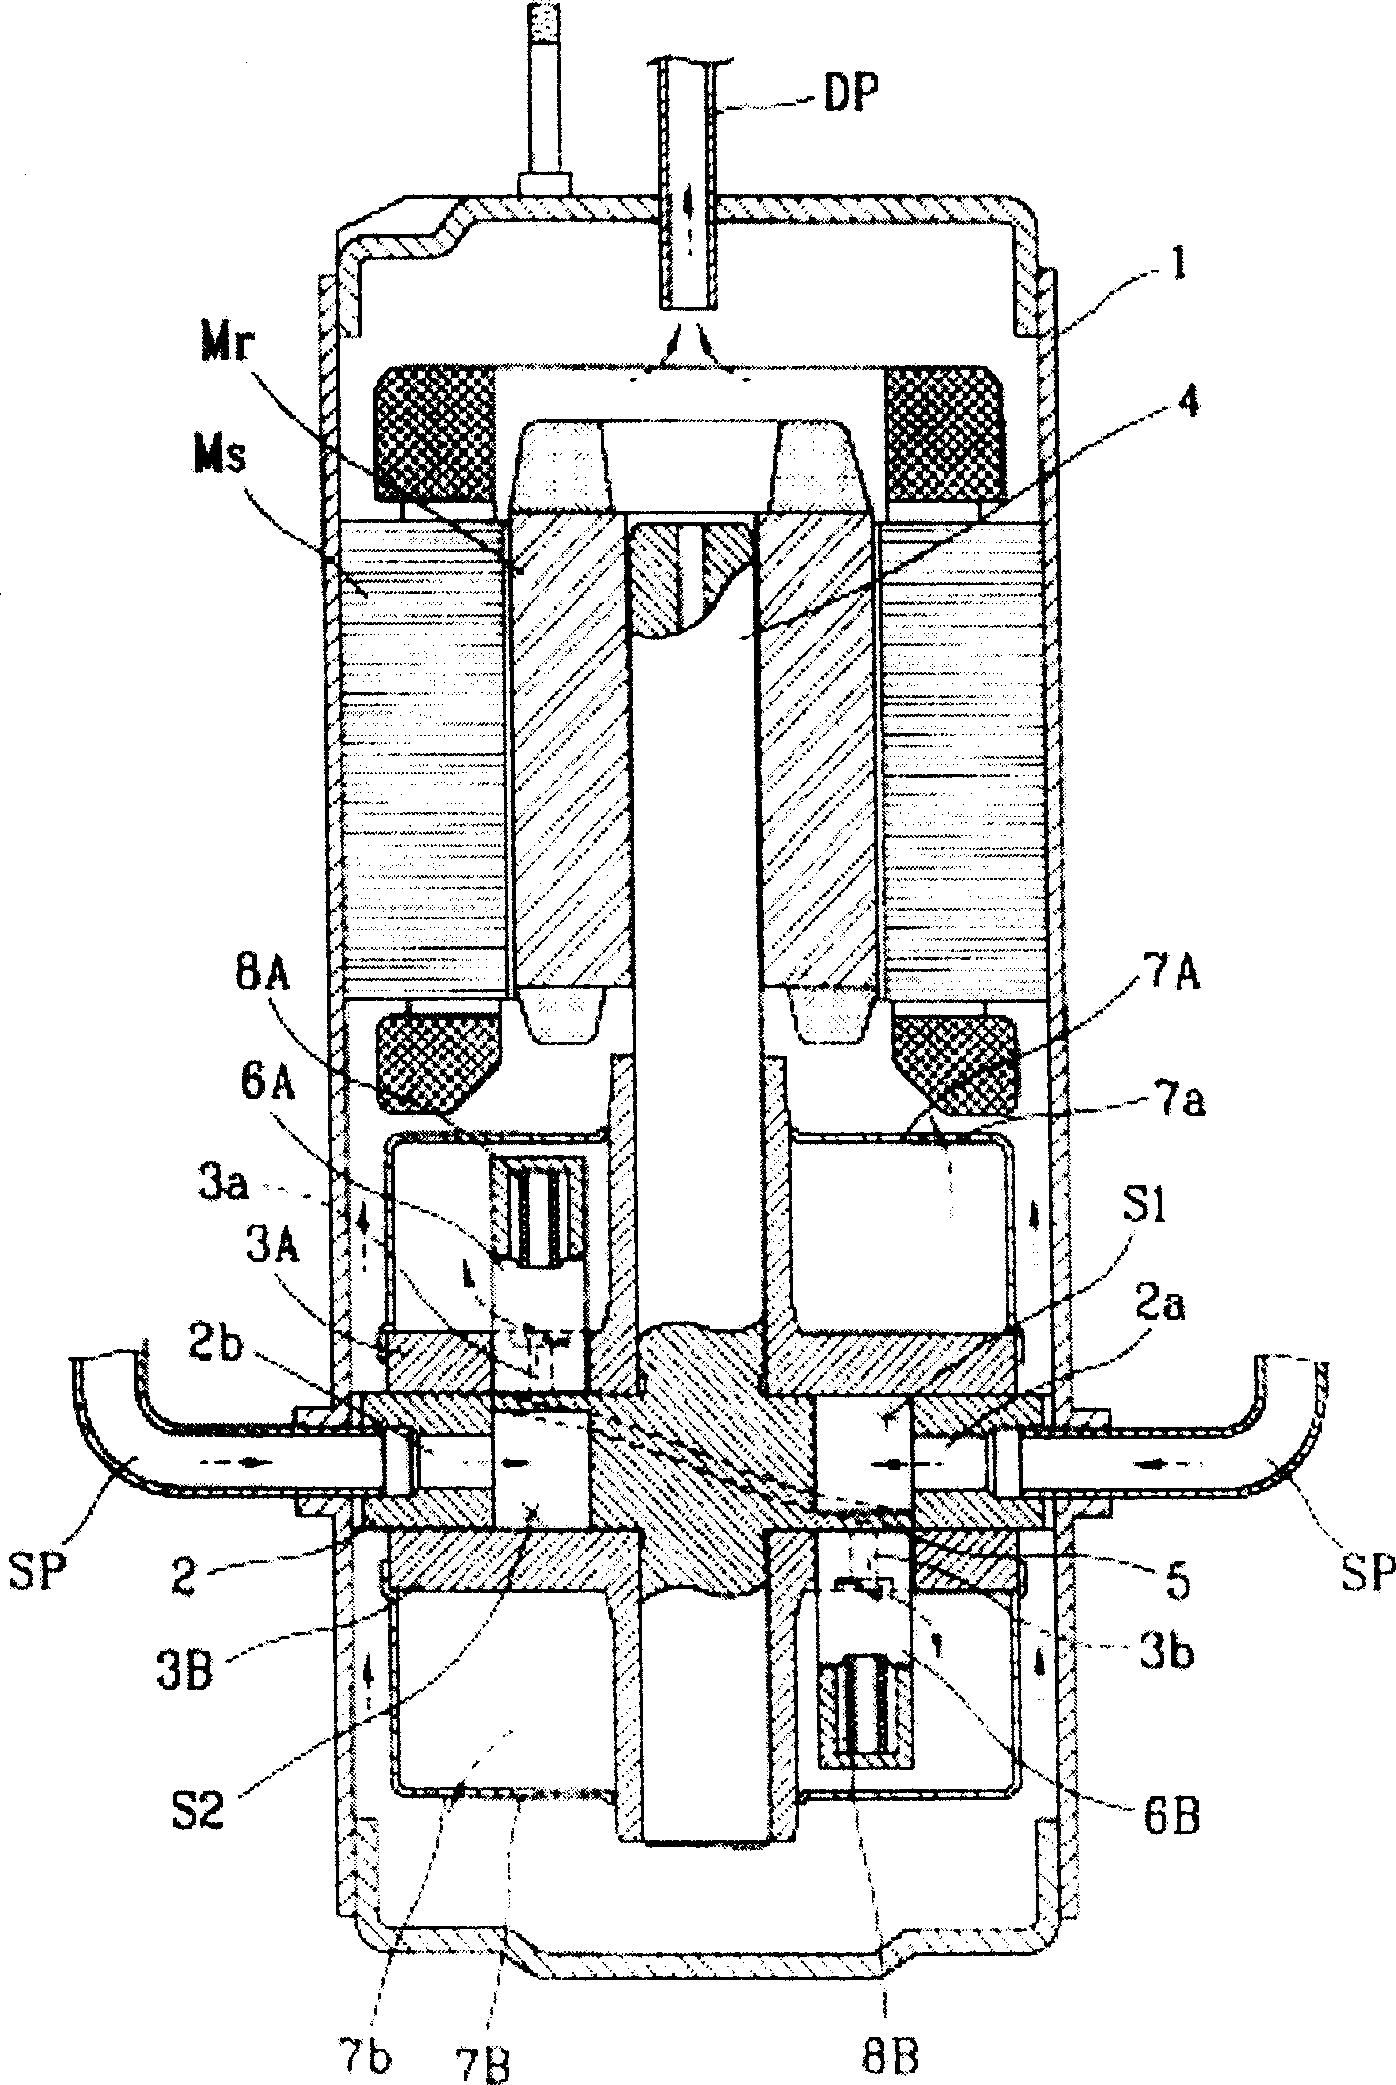 Partition plate structure of hermetic compressor